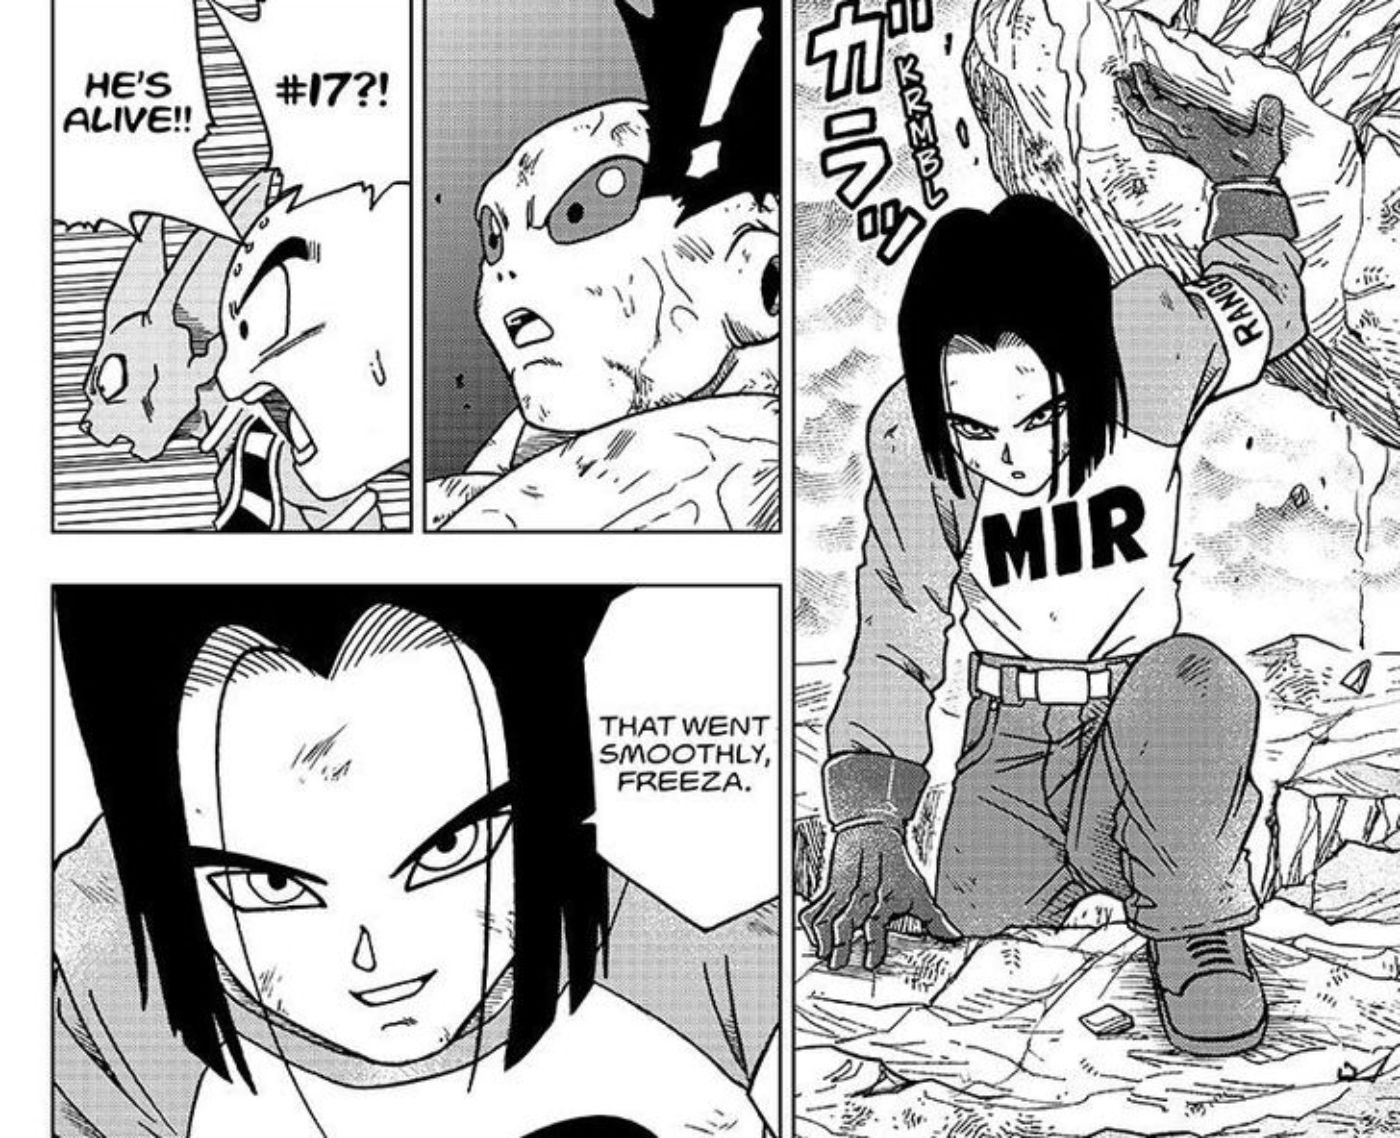 Dragon Ball Super’s Best Android 17 Fight Makes Much More Sense in GT